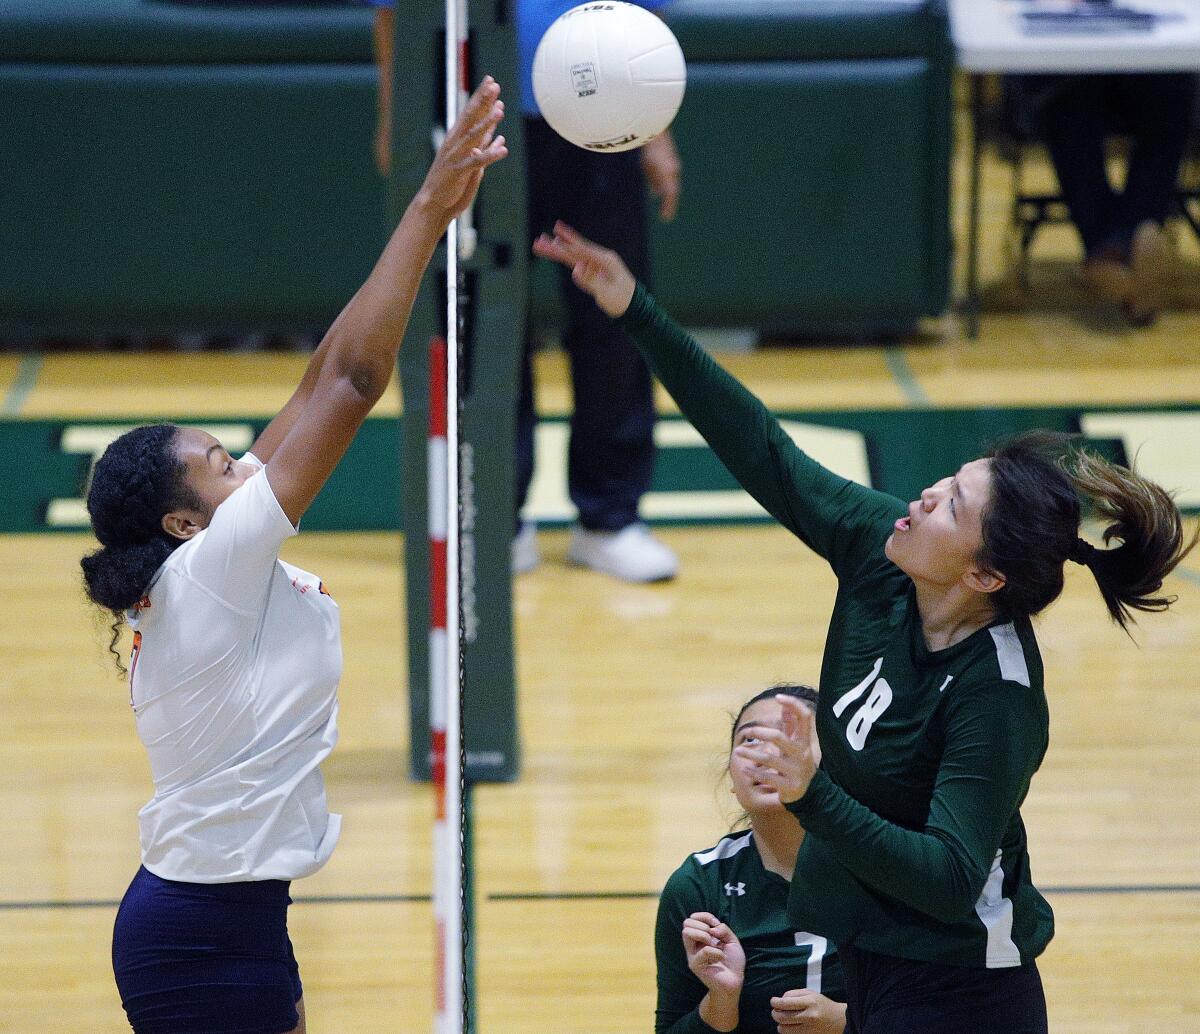 Providence's Jenelle Idian, right, battles against Polytechnic's Laila Ward for the ball at the top of the net in a Prep League girls' volleyball match at Providence High School on Tuesday, September 17, 2019.